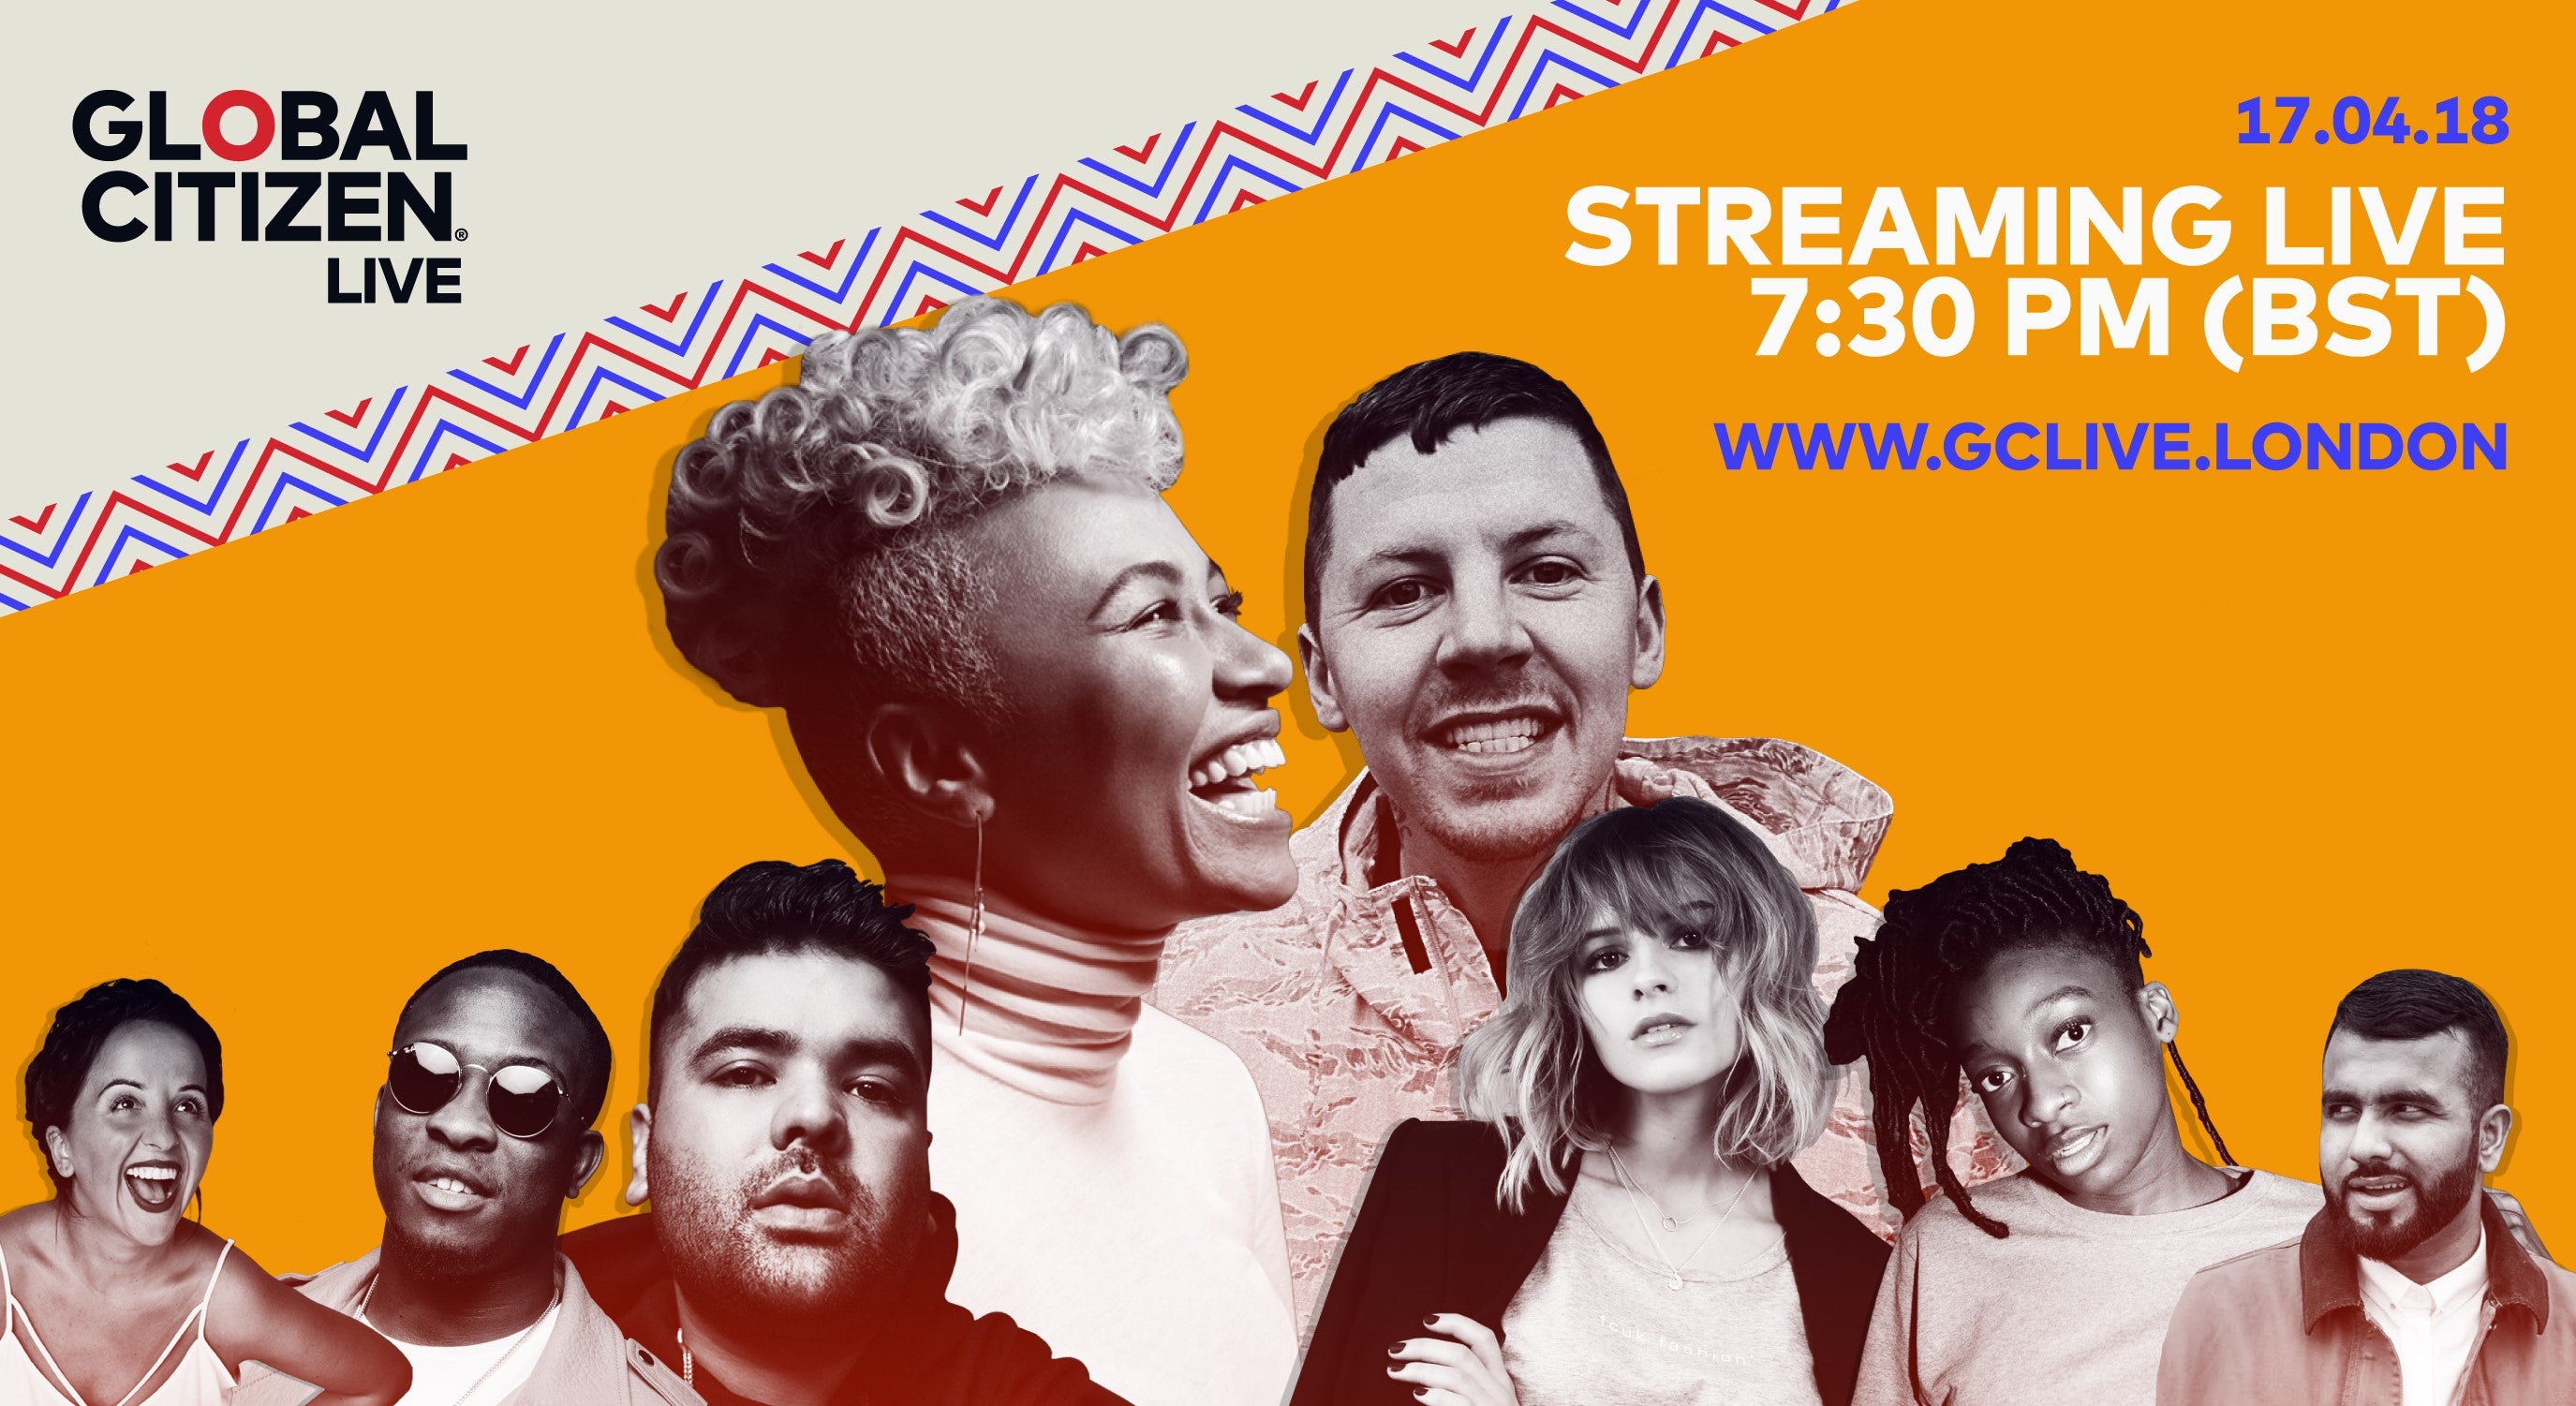 EXCLUSIVE: Watch Emeli Sandé, Professor Green, Naughty Boy and Many More Streamed Live from Global Citizen Live in London (1)